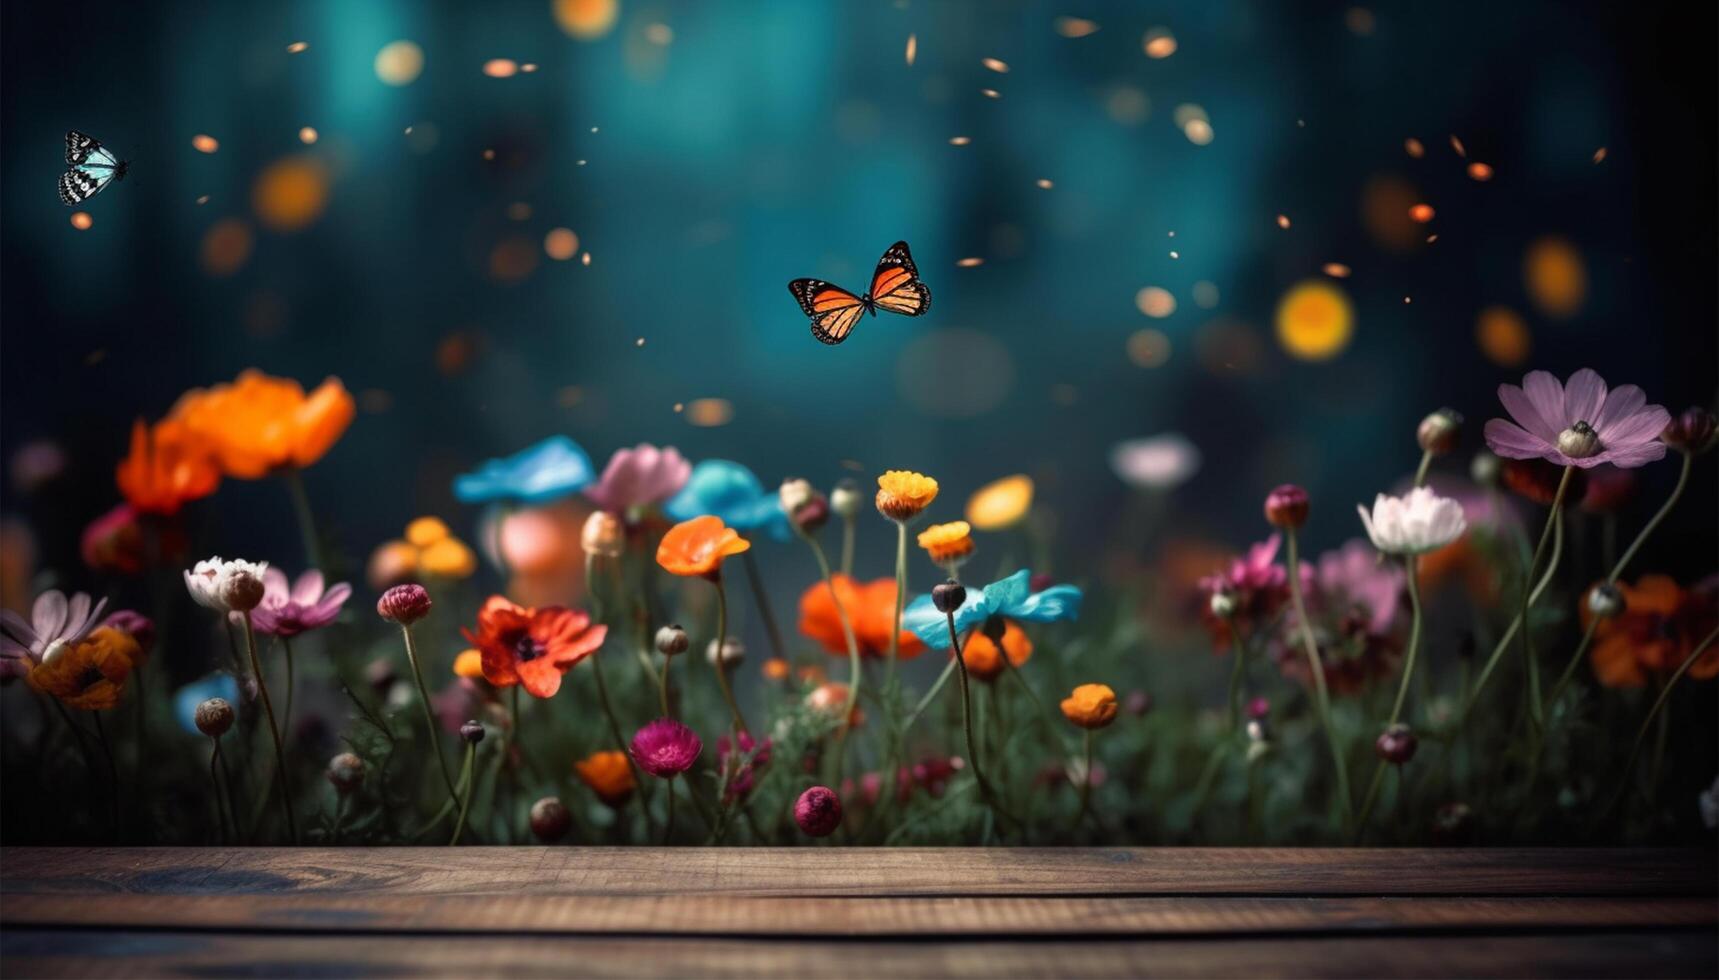 spring background. empty table, colorful flowers and butterflies. photo